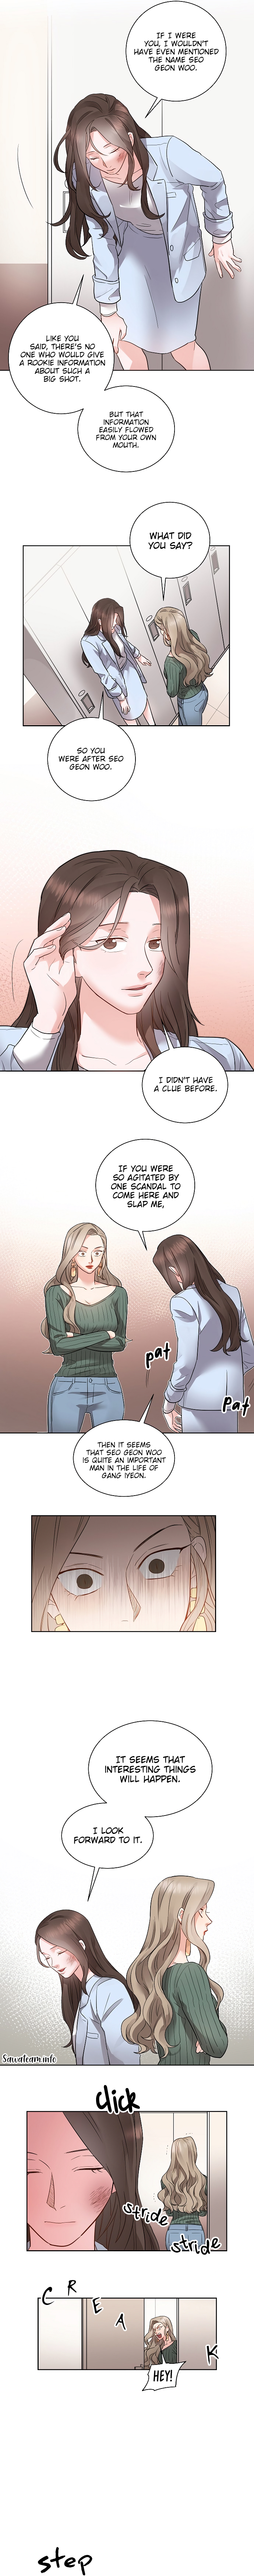 Liking you Excitedly Chapter 13 - Page 5